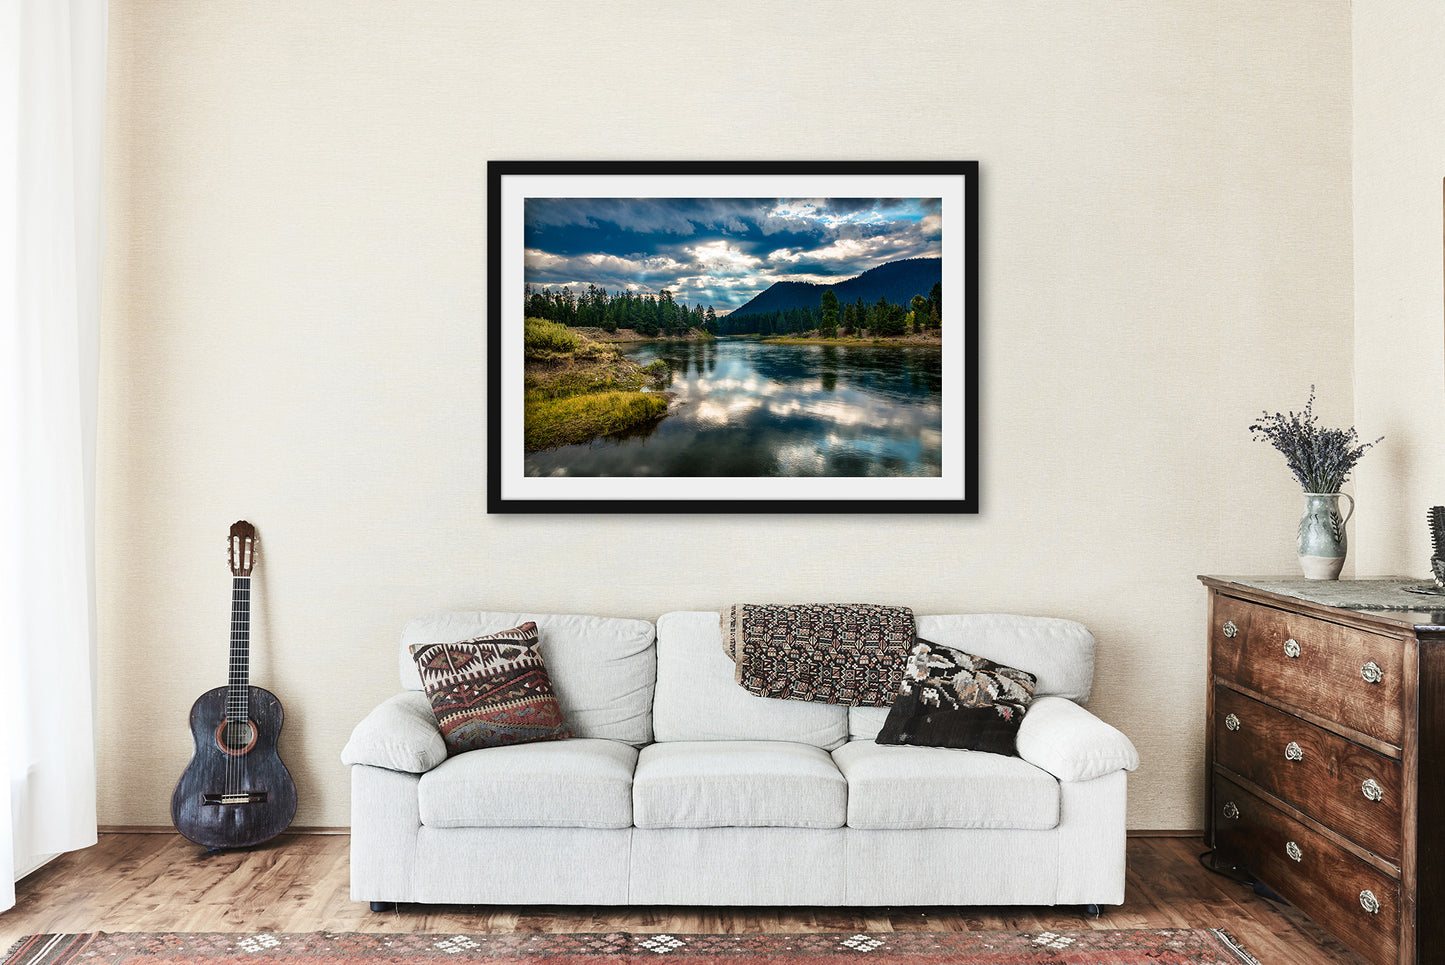 Framed and Matted Print - Picture of Snake River on Autumn Morning in Grand Teton National Park Wyoming - Western Wall Art Photo Decor